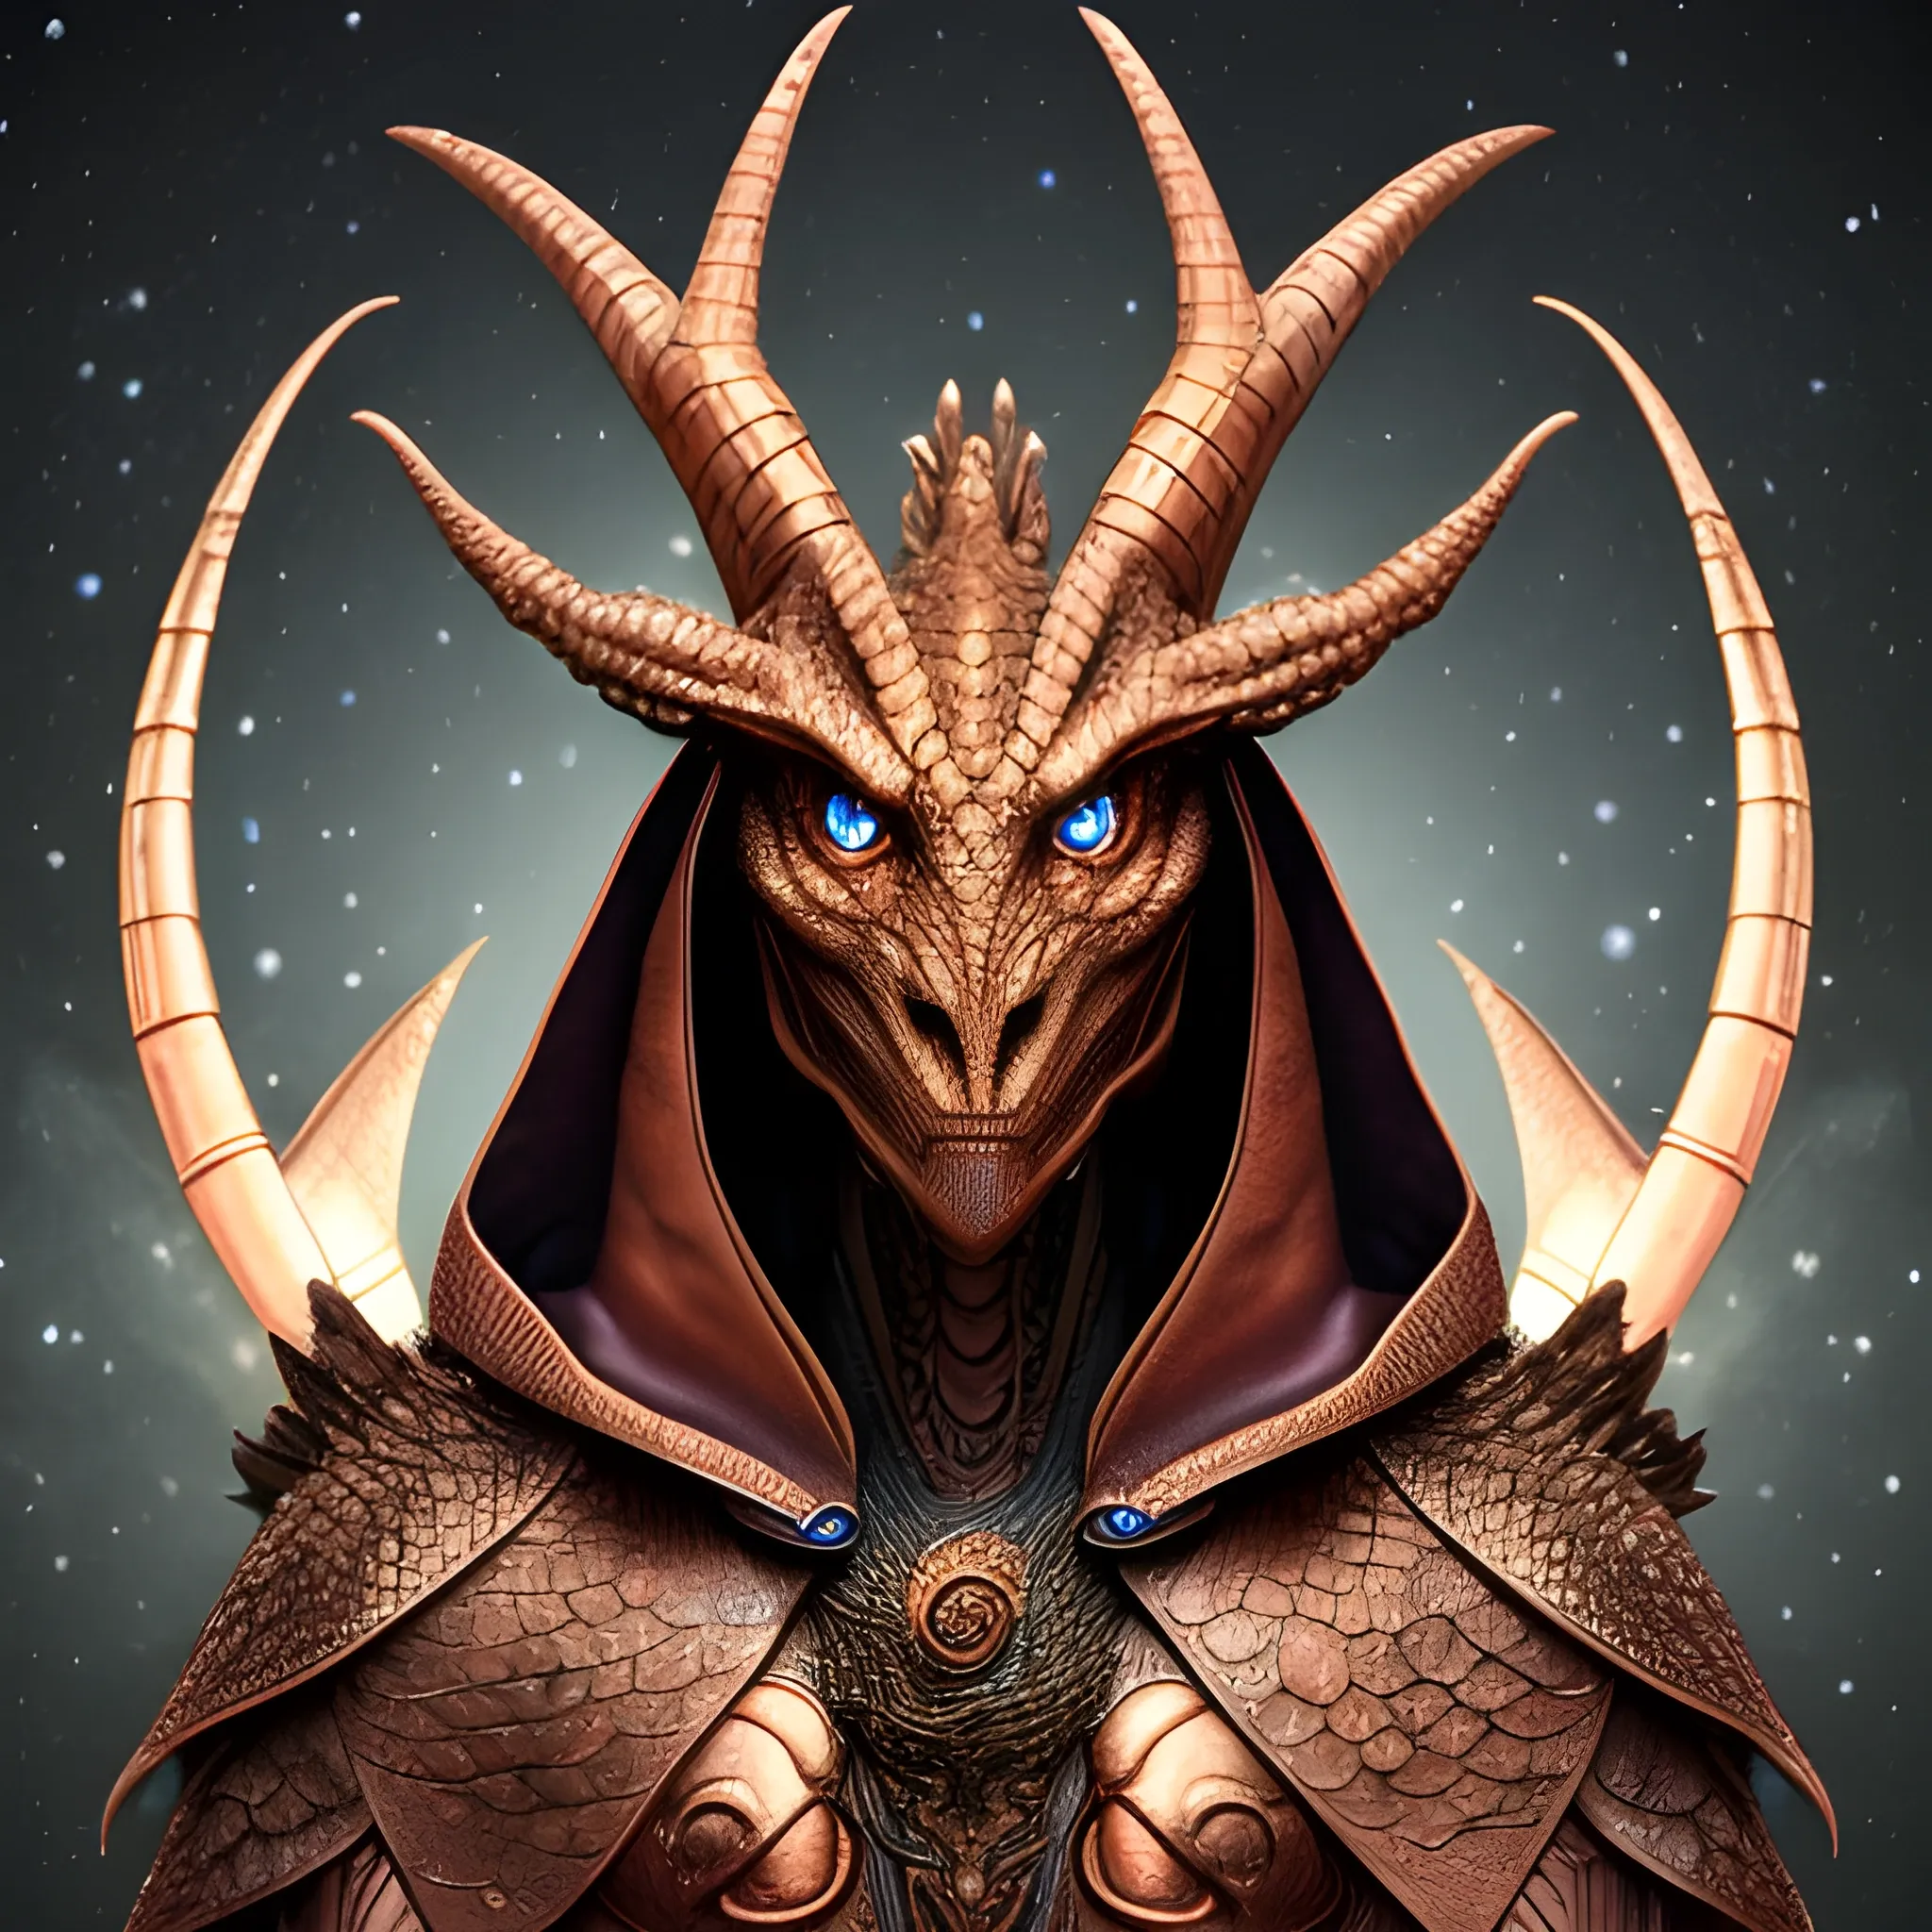 Humanoid dragon looking at the camera. He has copper scales and is wearing a cloak that has stars on it. Fantasy